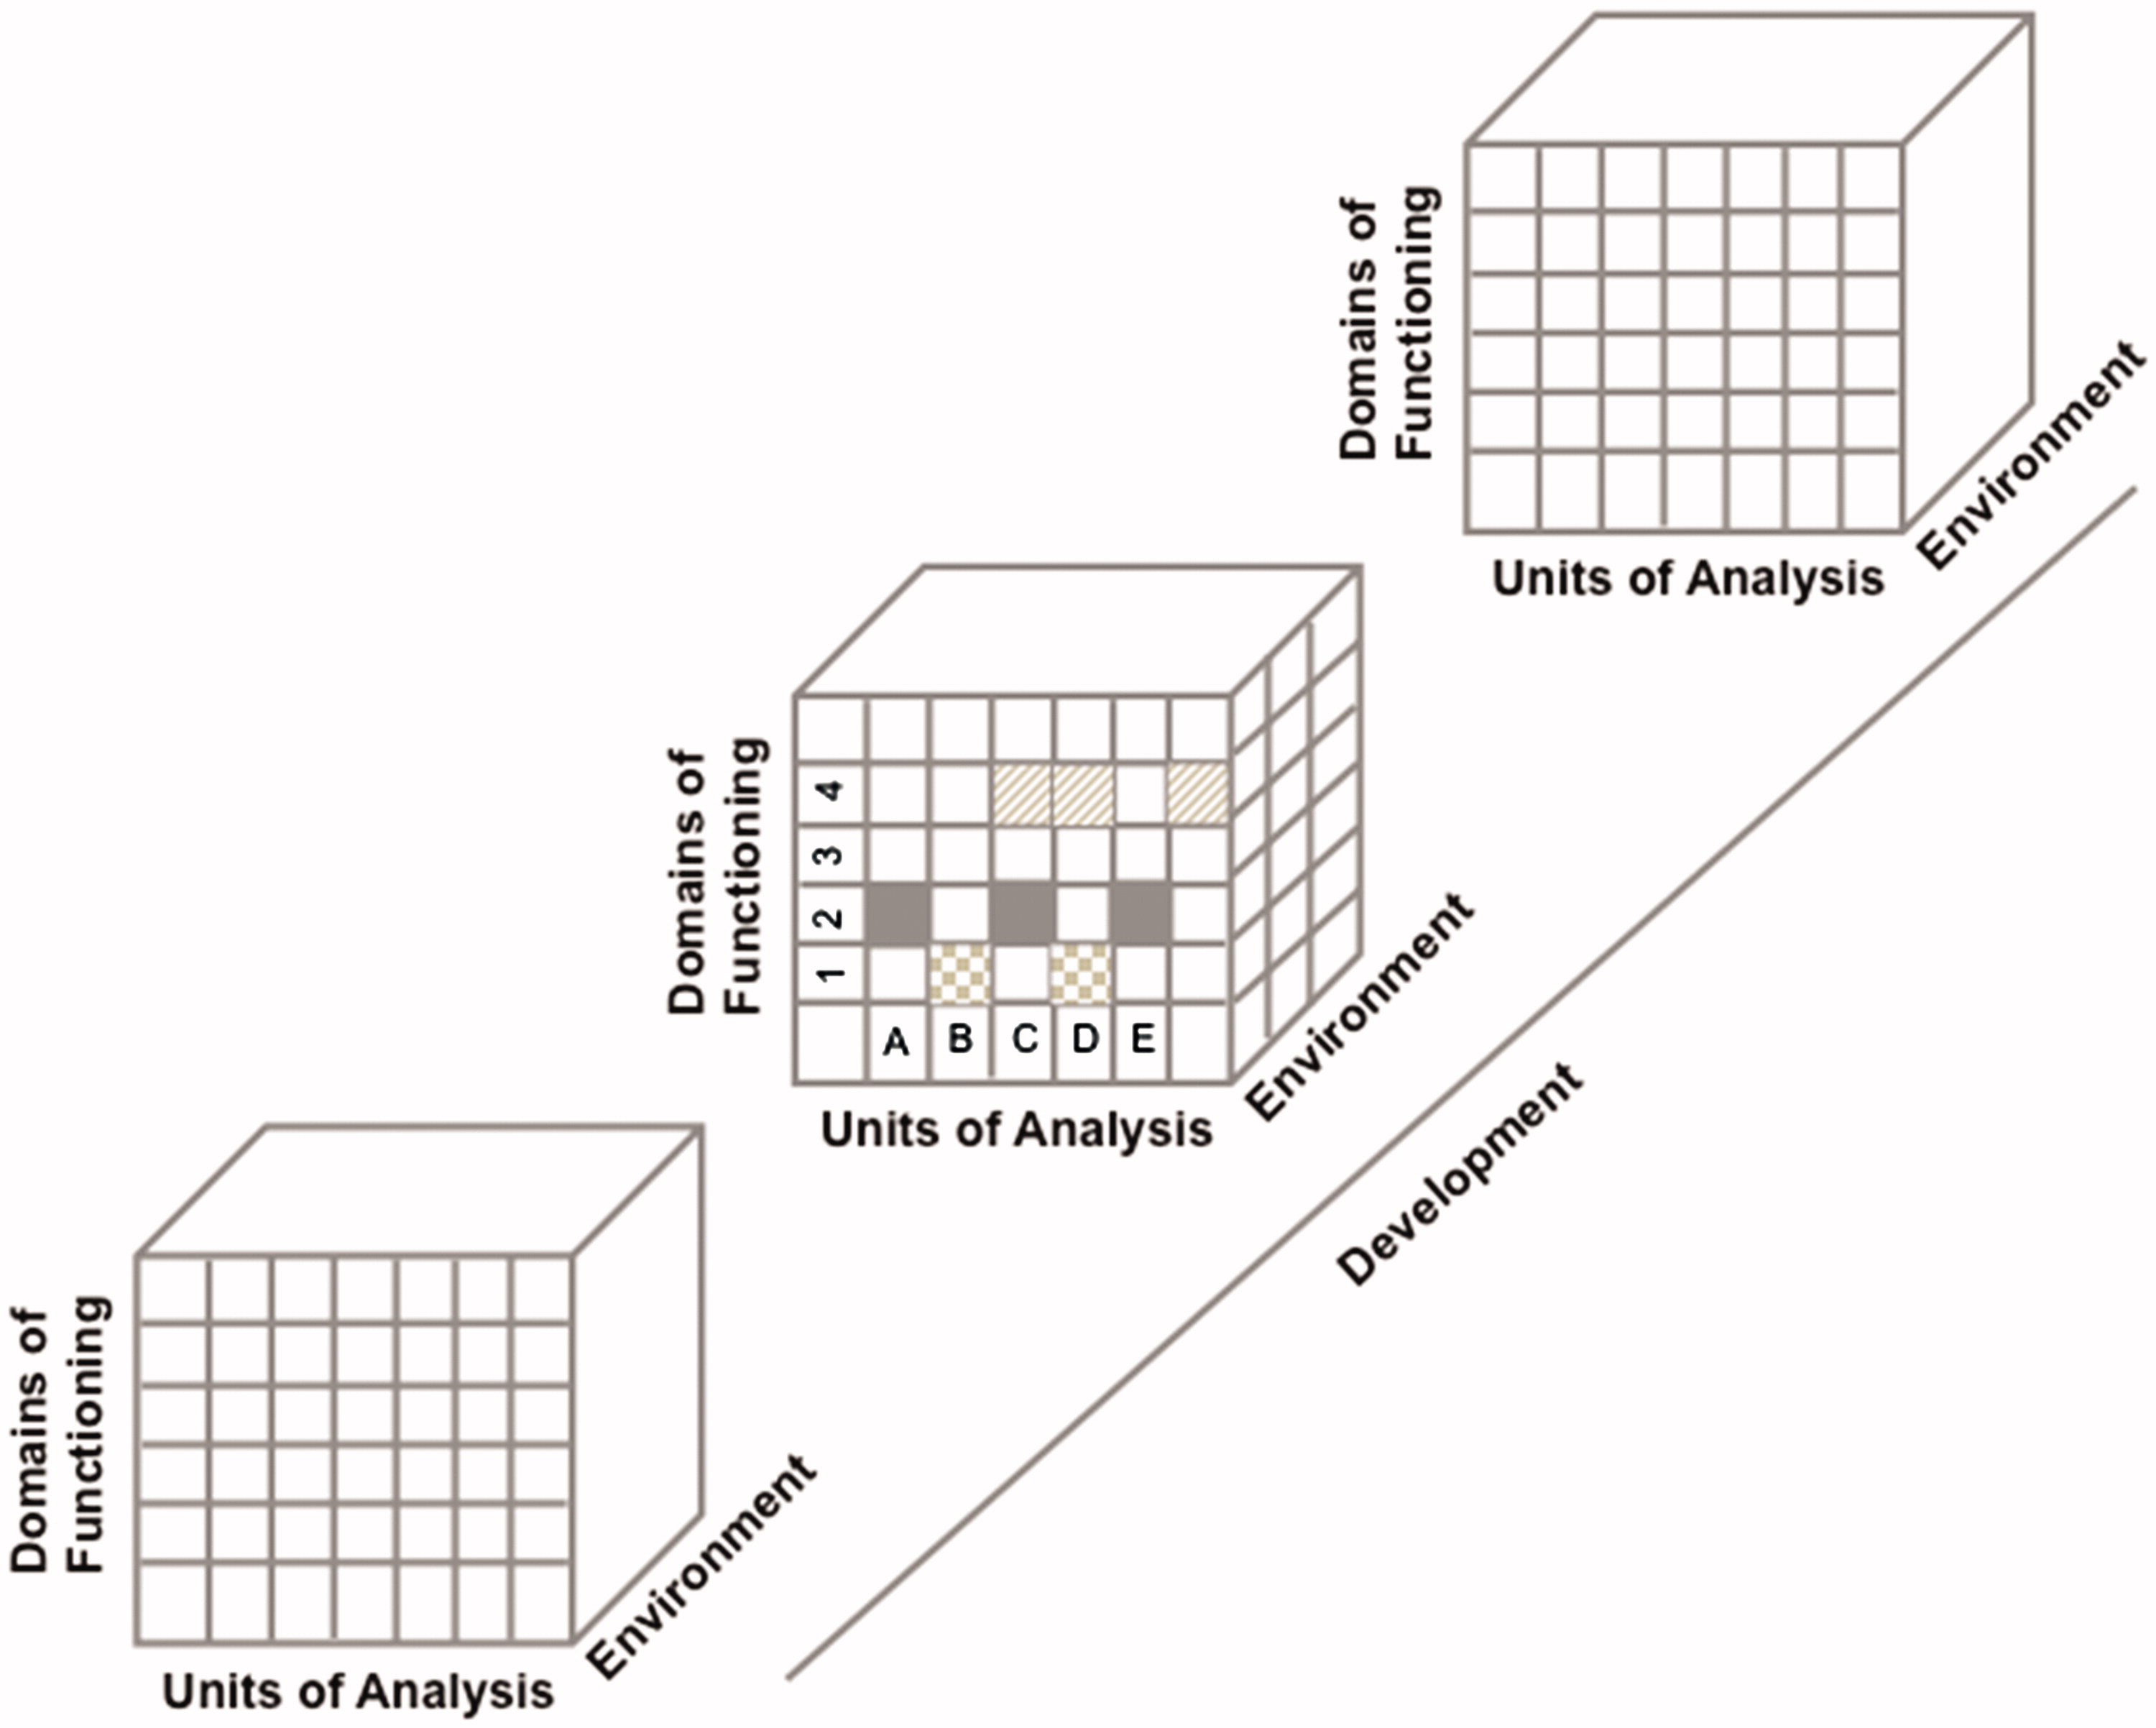 Schematization Representation (From an Original idea from Woody & Gibb (2015)) of the Four-Dimensional Matrix of the RDoC Framework. Each row represents a sub-domain of functioning that could be studied in different studies or in a single study. Each column represents a unit of analysis. The different matrices are represented as a function of the environmental and developmental dimensions. For example, the domain of functioning in figure could represent the ‘Negative Valence System’ where ‘1’ represents acute threat or fear, ‘2’ represents potential threat of anxiety, ‘3’ represents sustained threat, and ‘4’ represents loss. The units of analysis could be represented by ‘A’ Genes; ‘B’ Stress Hormones; ‘C’ EEG; ‘D’ Brain imaging, and ‘E’: Metabolic markers. Each row of this schematized RDoC matrix represents a particular study (e.g., the gray boxes in Row #1 could represent a study measuring acute threat of fear as a function of stress hormones and brain imaging in an adult population) and the results of various studies are represented by the different filled boxes represented in rows and columns. Environmental and developmental factors could be added to all of these studies. (Figure reprinted from Lupien et al. (2017), Figure 1, p. 9. Lupien, S. J., Sasseville, M., François, N., Giguère, C. E., Boissonneault, J., Plusquellec, P., Godbout, R., Xiong, L., Potvin, S., Kouassi, E., & Lesage, A. (2017). The DSM5/RDoC debate on the future of mental health research: implication for studies on human stress and presentation of the signature bank. Stress, 20(1), 2-18. https://doi.org/10.1080/10253890.2017.1286324)